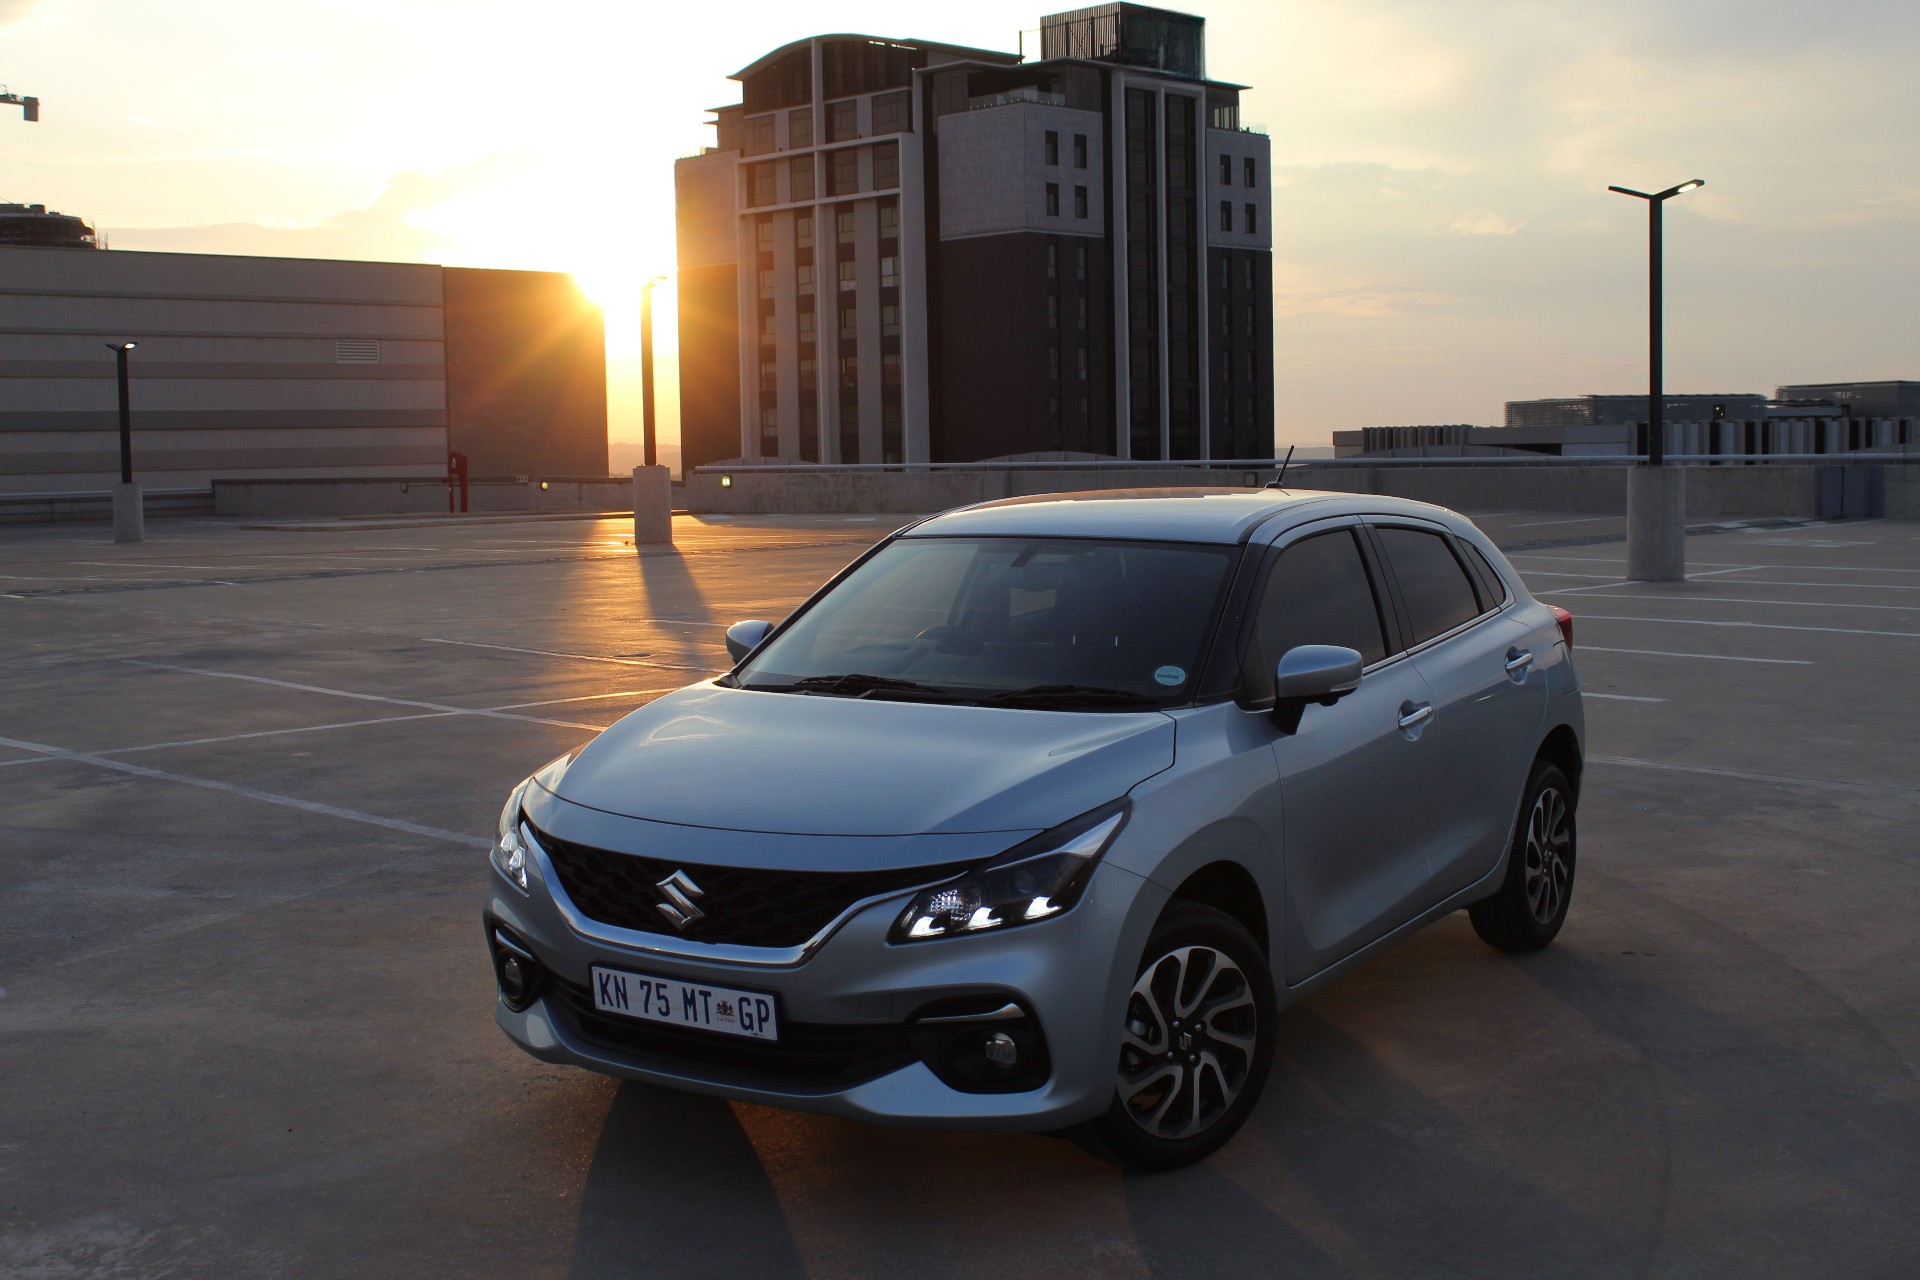 A beauty shot of the Suzuki Baleno with the sun rising in the background